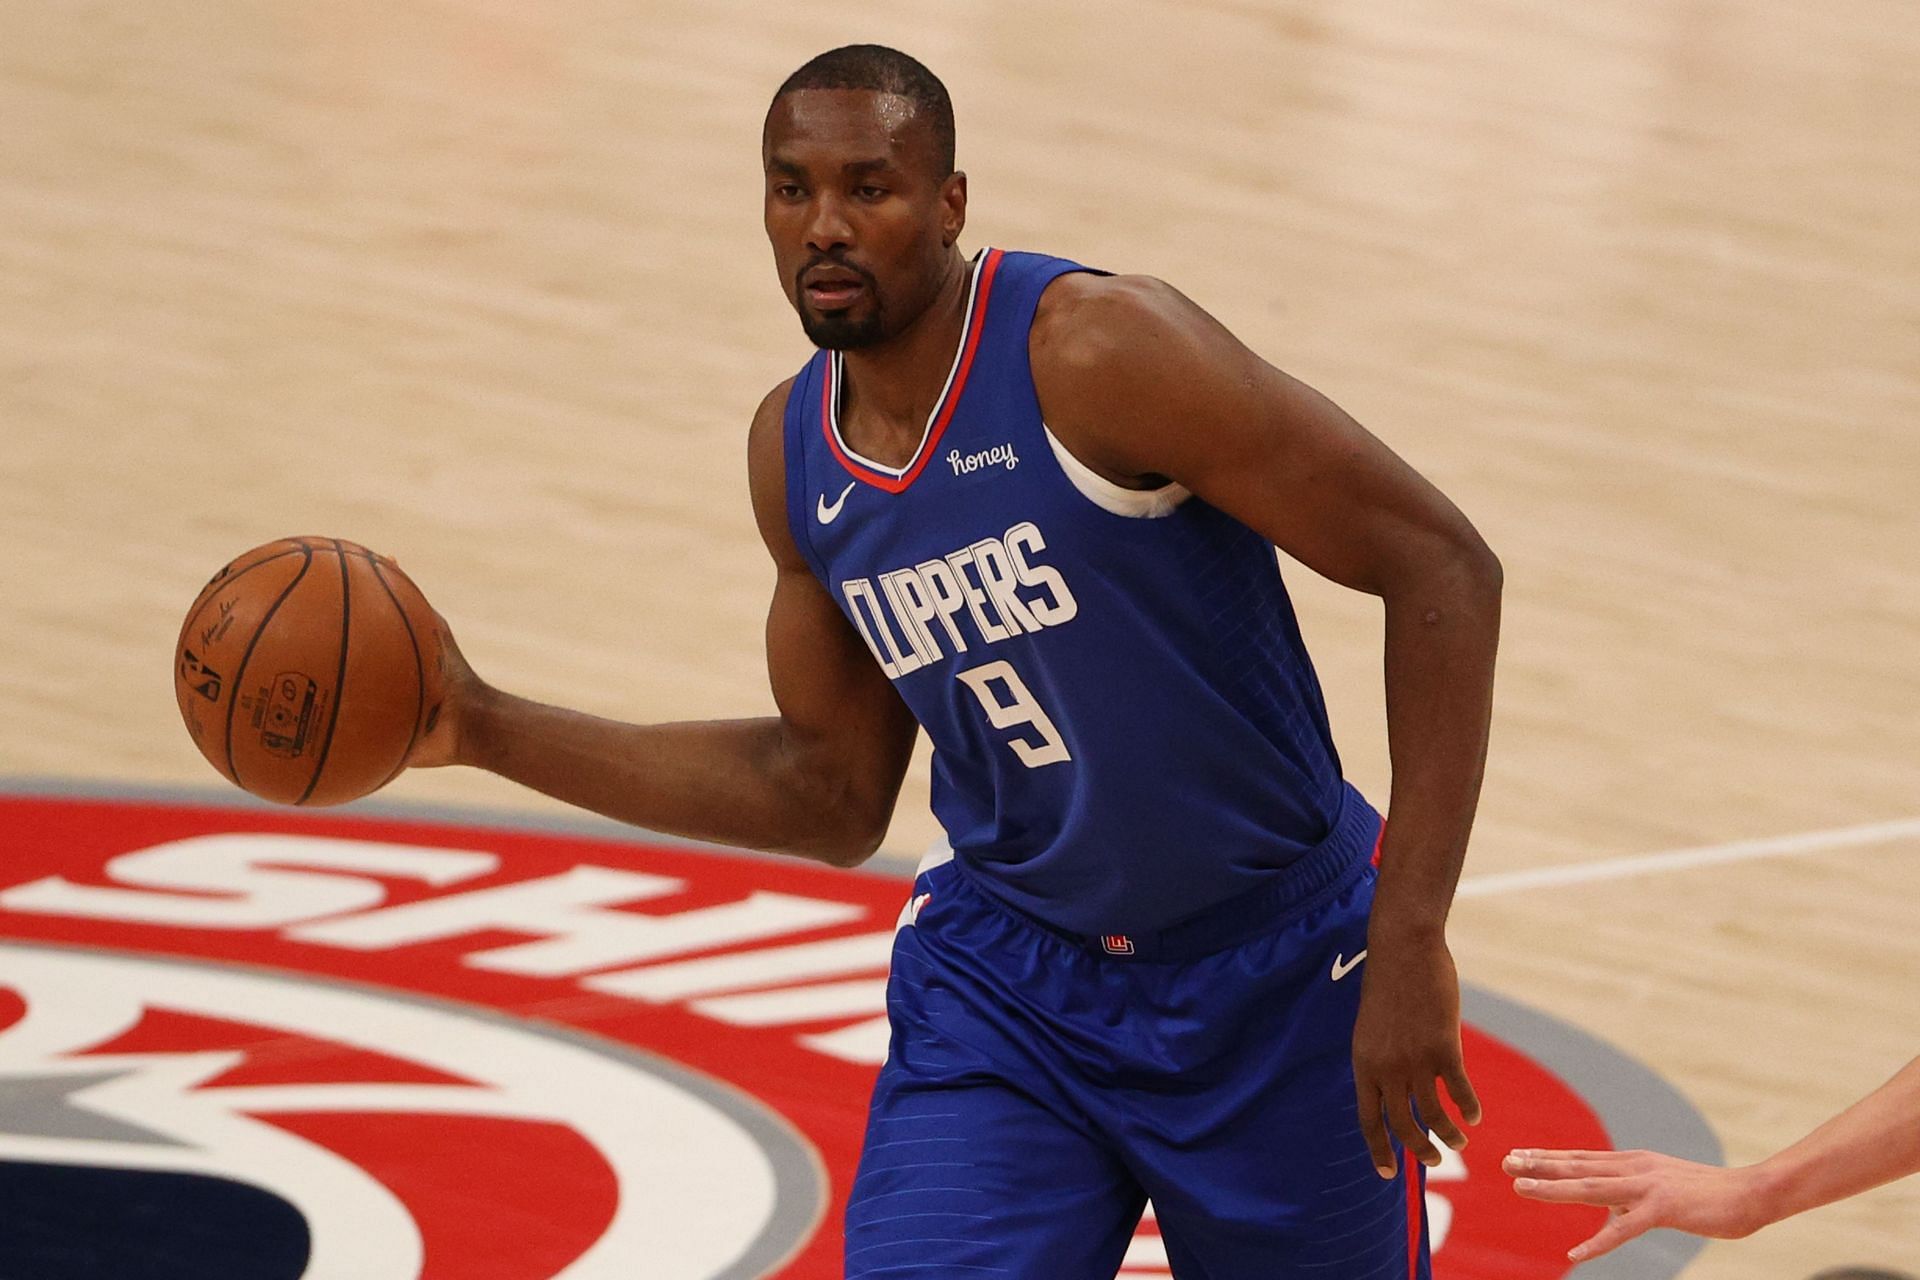 Serge Ibaka in action during an NBA game for the LA Clippers.